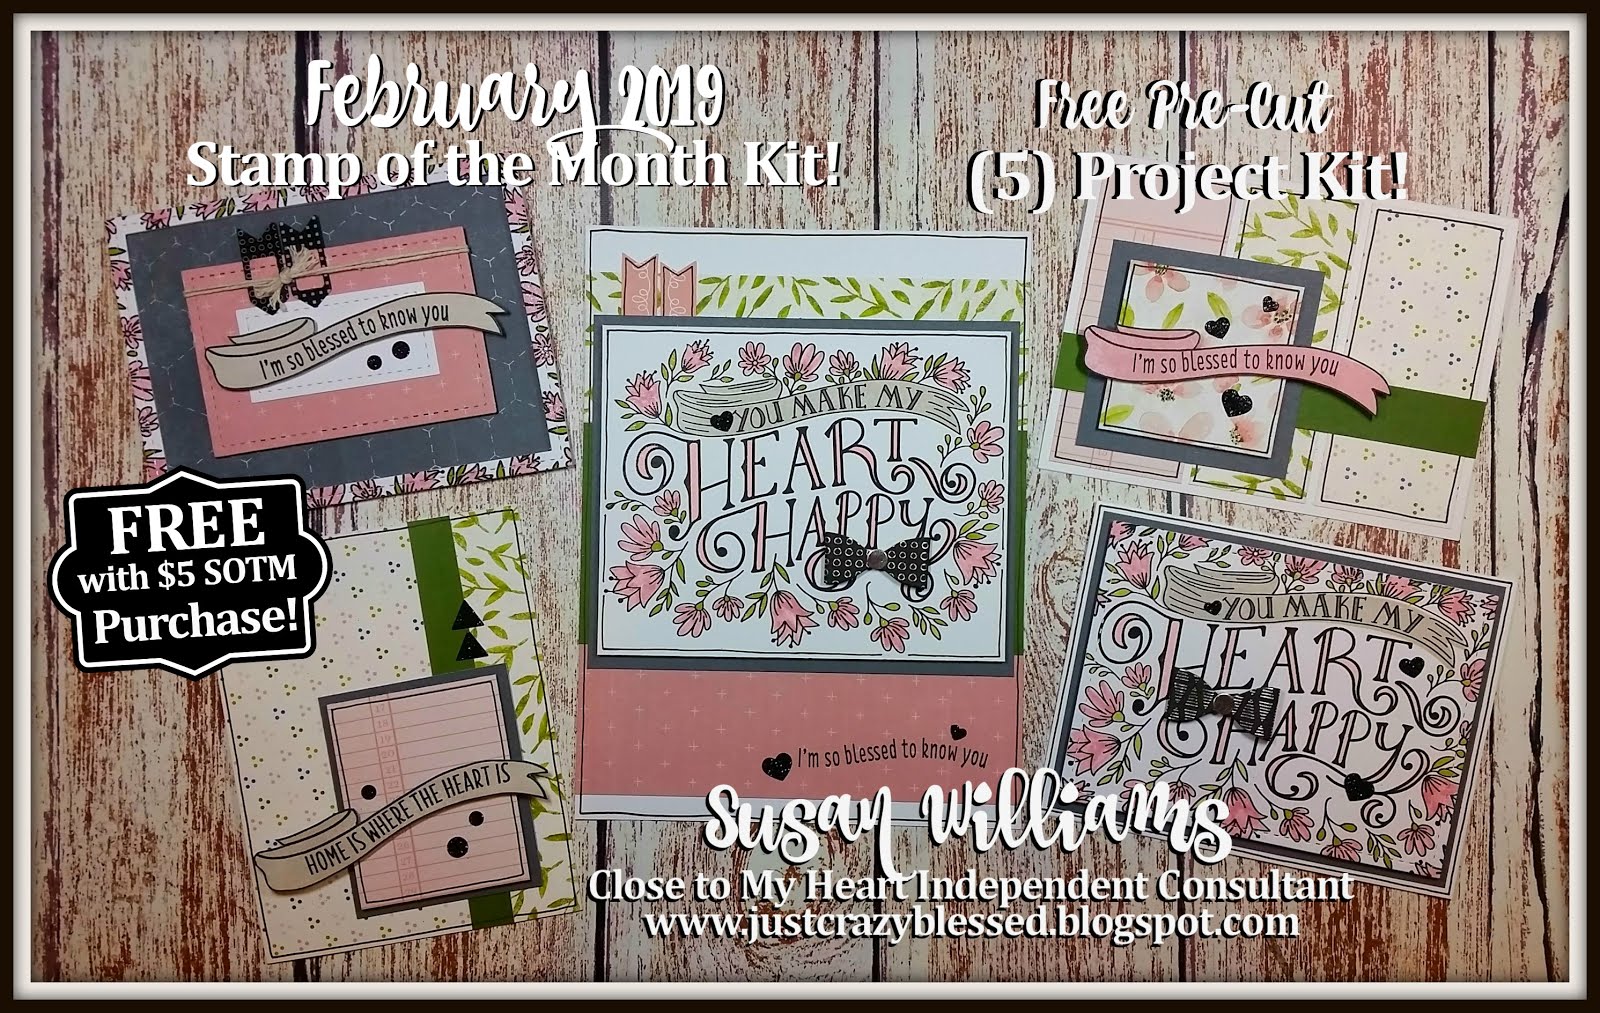 February 2019 Stamp of the Month Workshop!